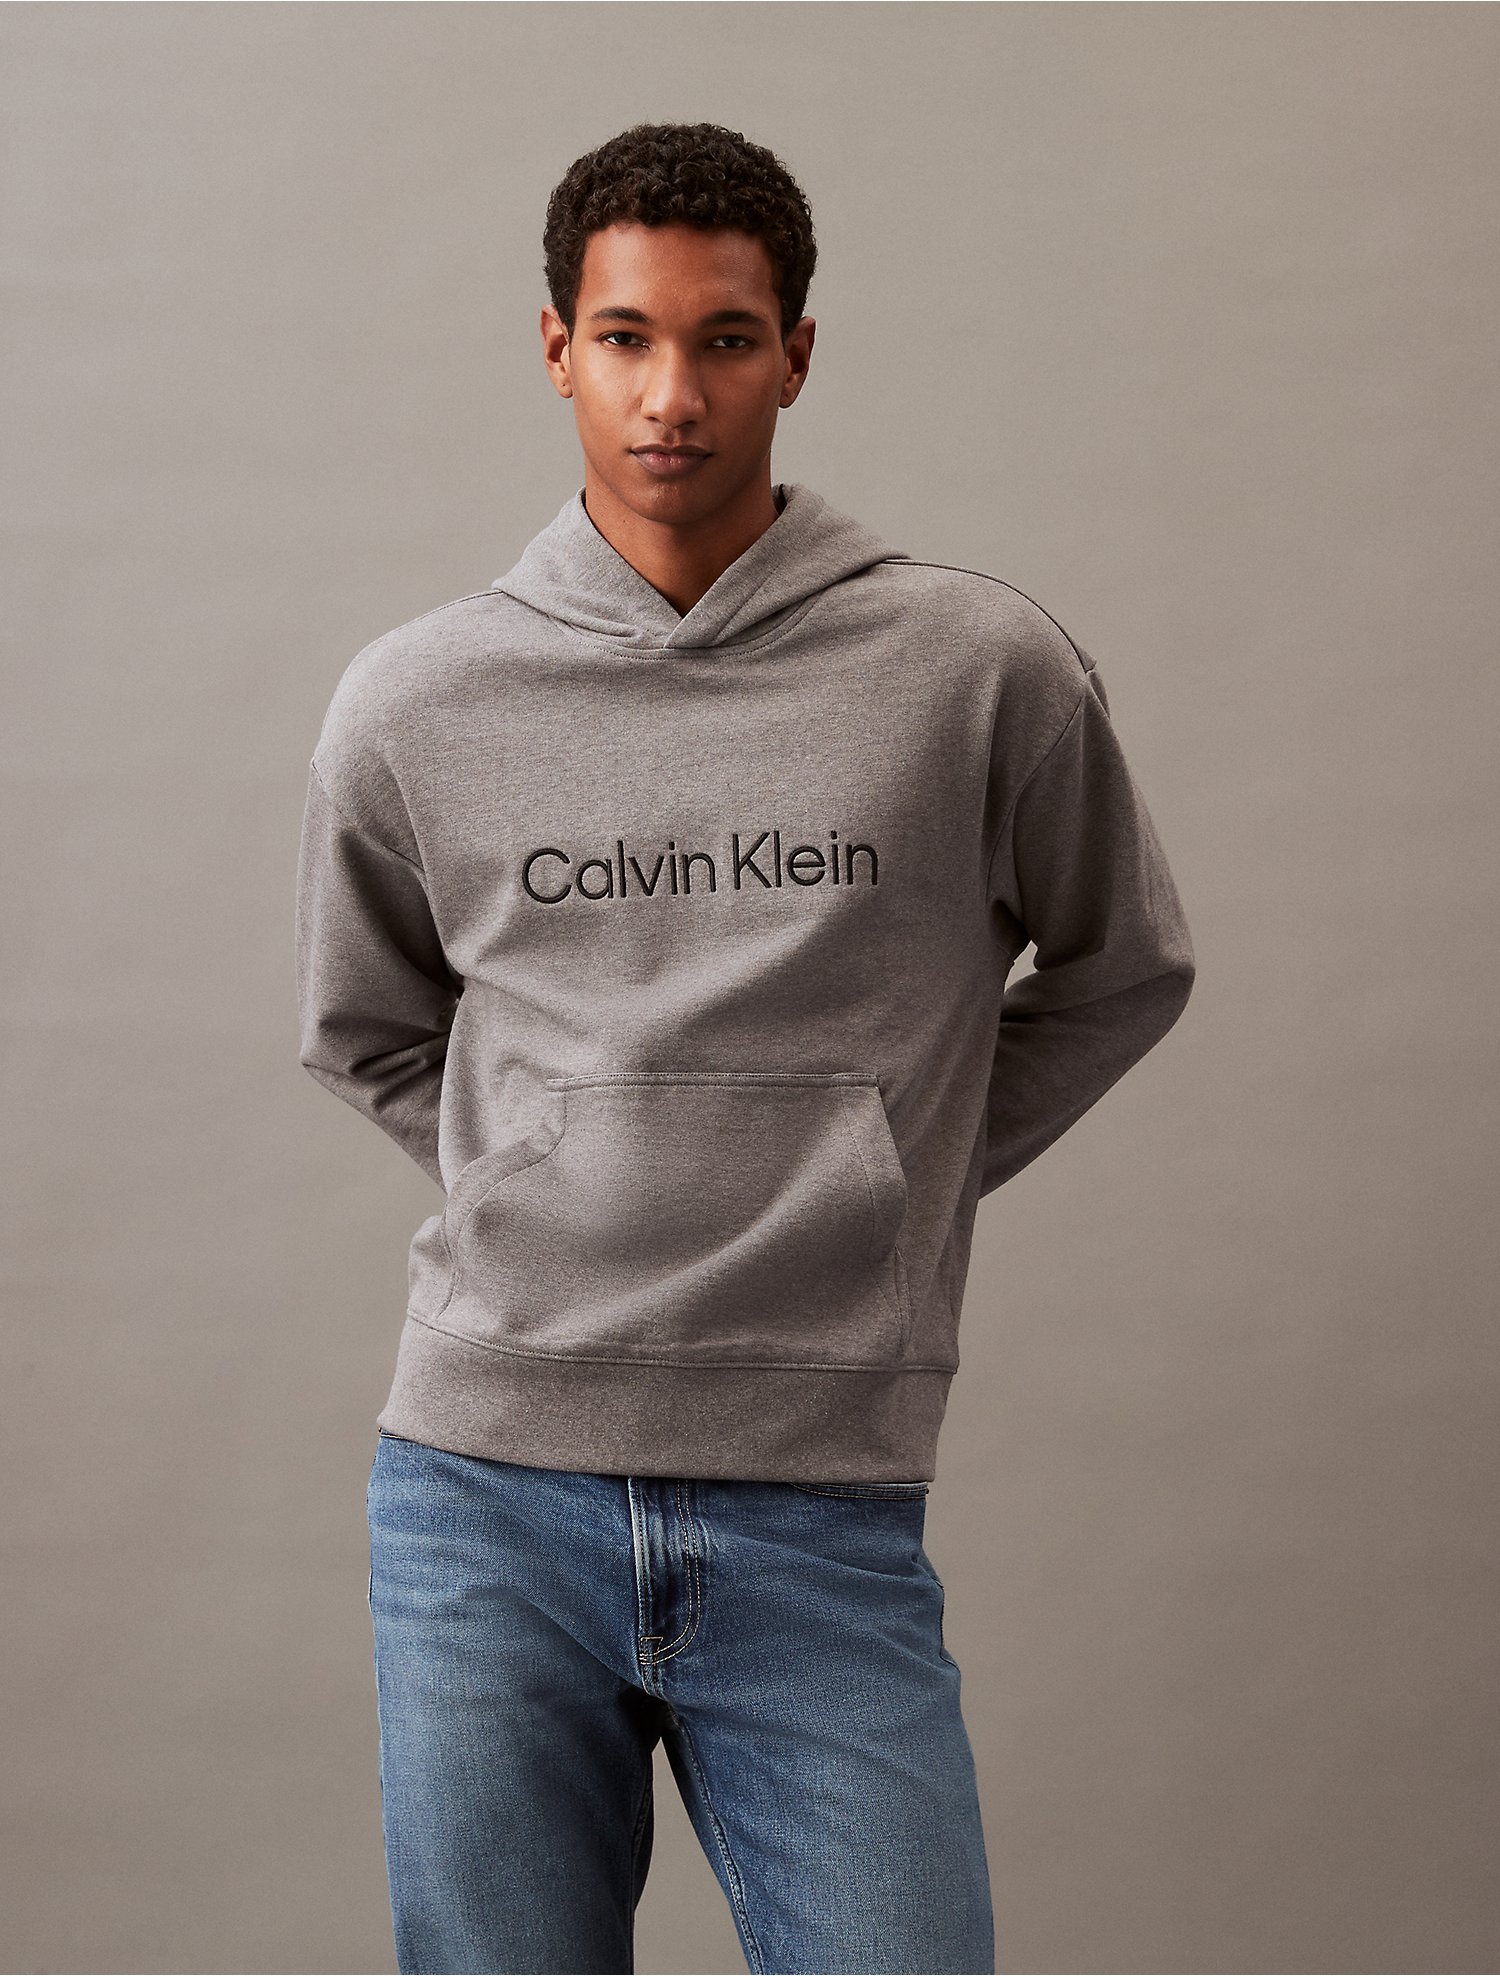 Melodieus Haven pedaal Relaxed Fit Standard Logo Hoodie | Calvin Klein